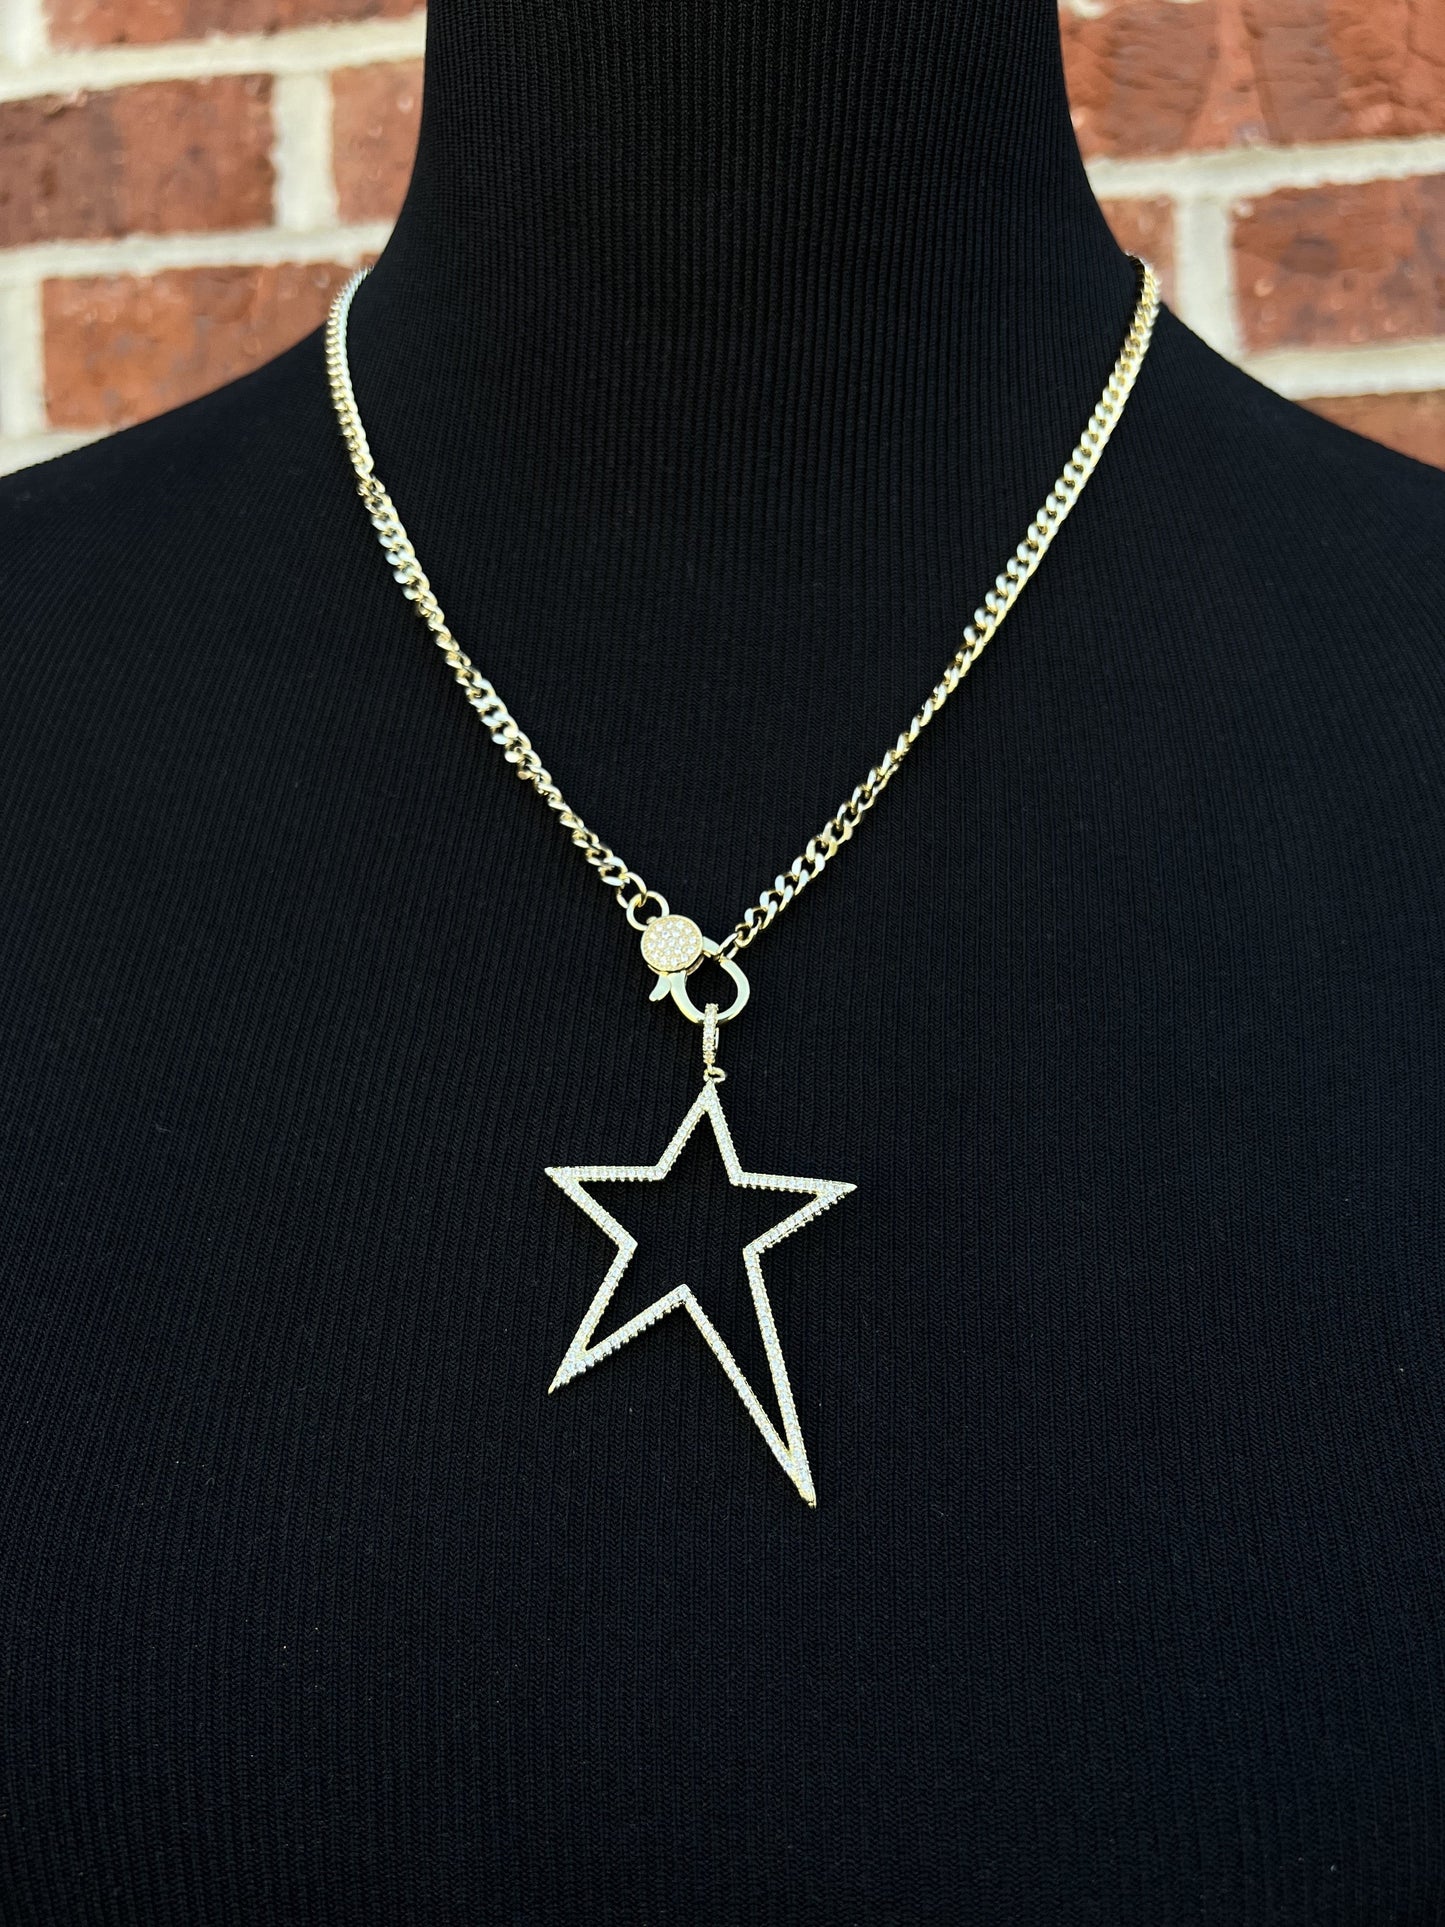 Lights Flashin' Star Necklace in Gold